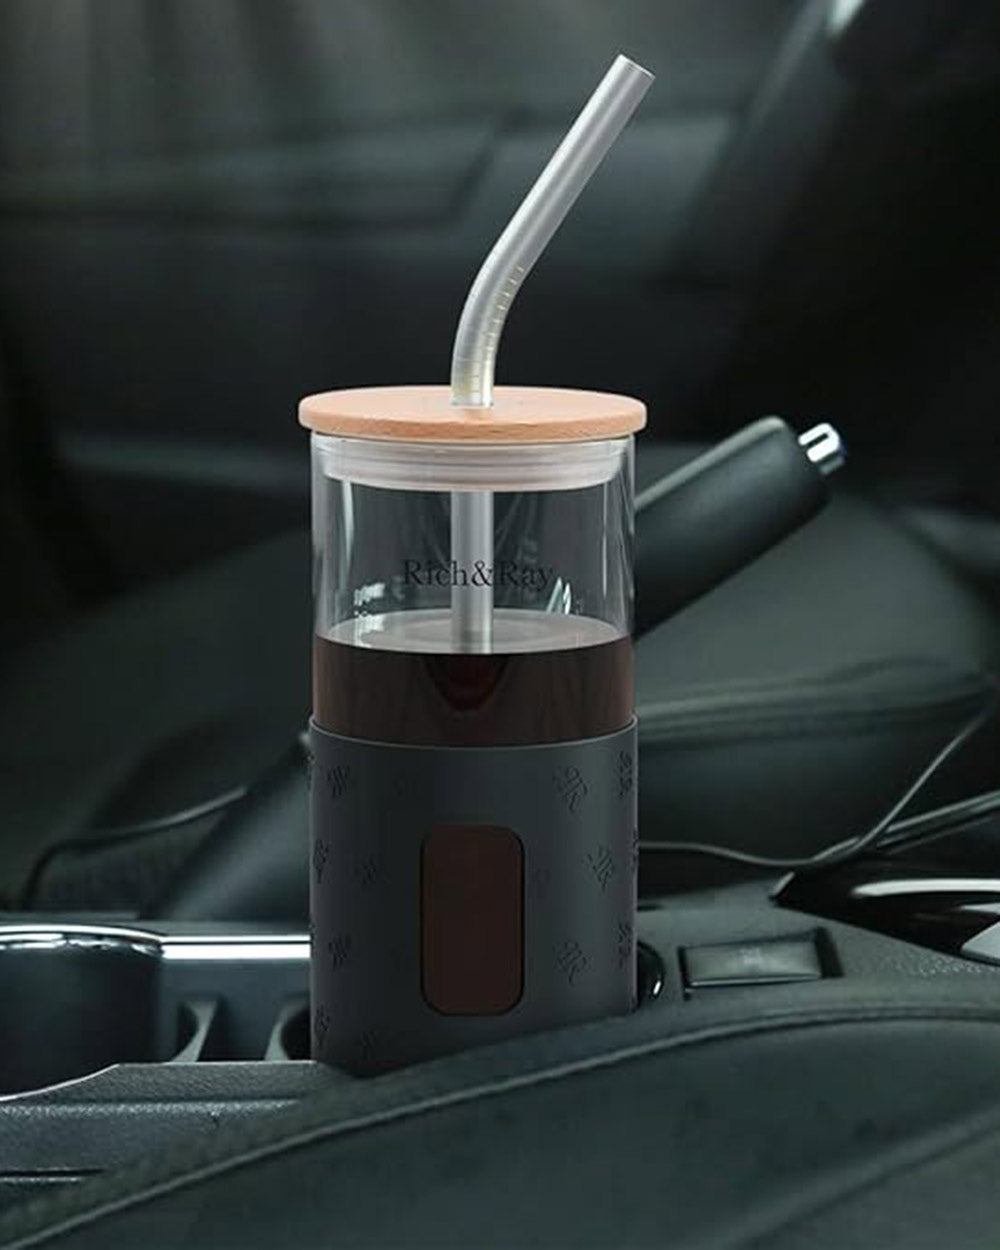 Rich & Ray 2 Reusable Glass Tumbler with Straw and Lid